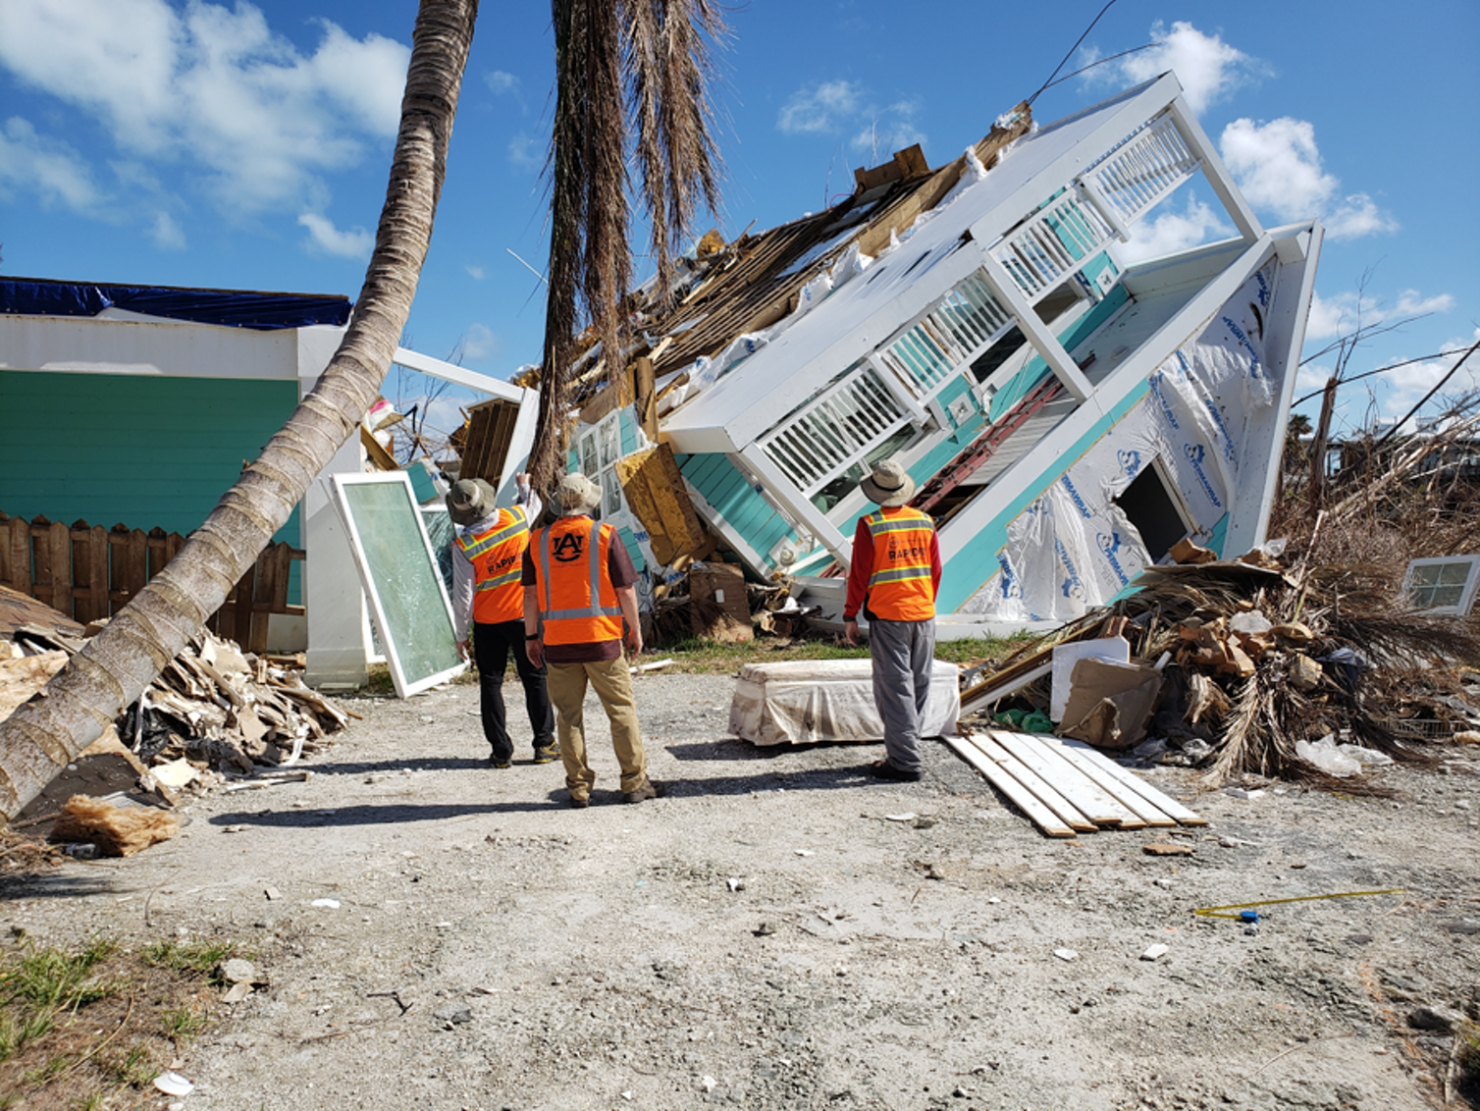 Engineers from the Structural Extreme Events through Reconnaissance research group inspected buildings damaged after the hurricane to capture how failures happened. Justin Marshall